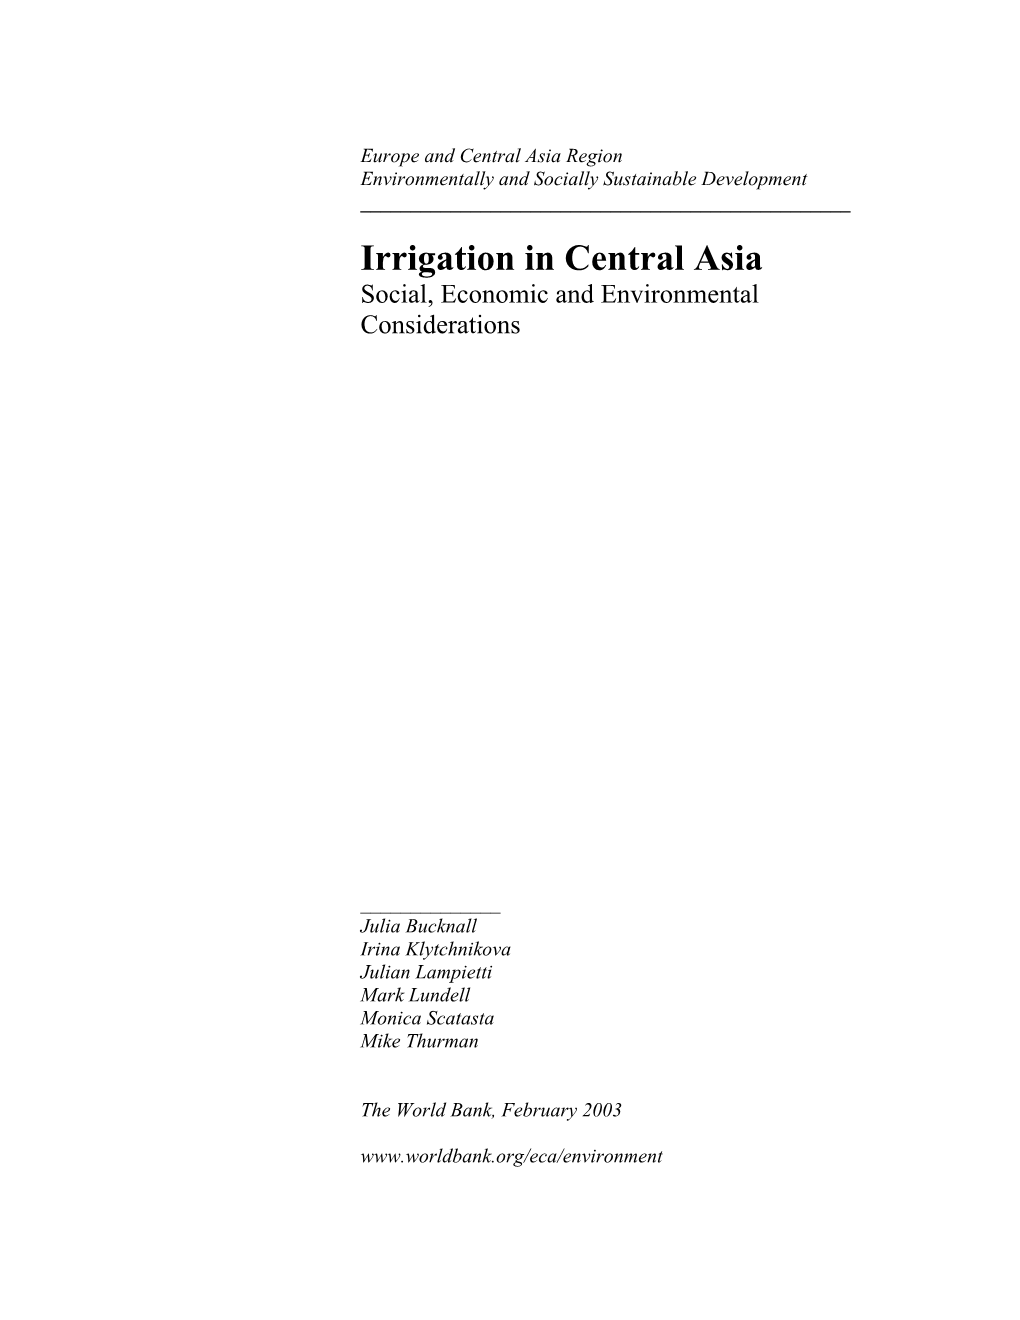 Irrigation in Central Asia Social, Economic and Environmental Considerations